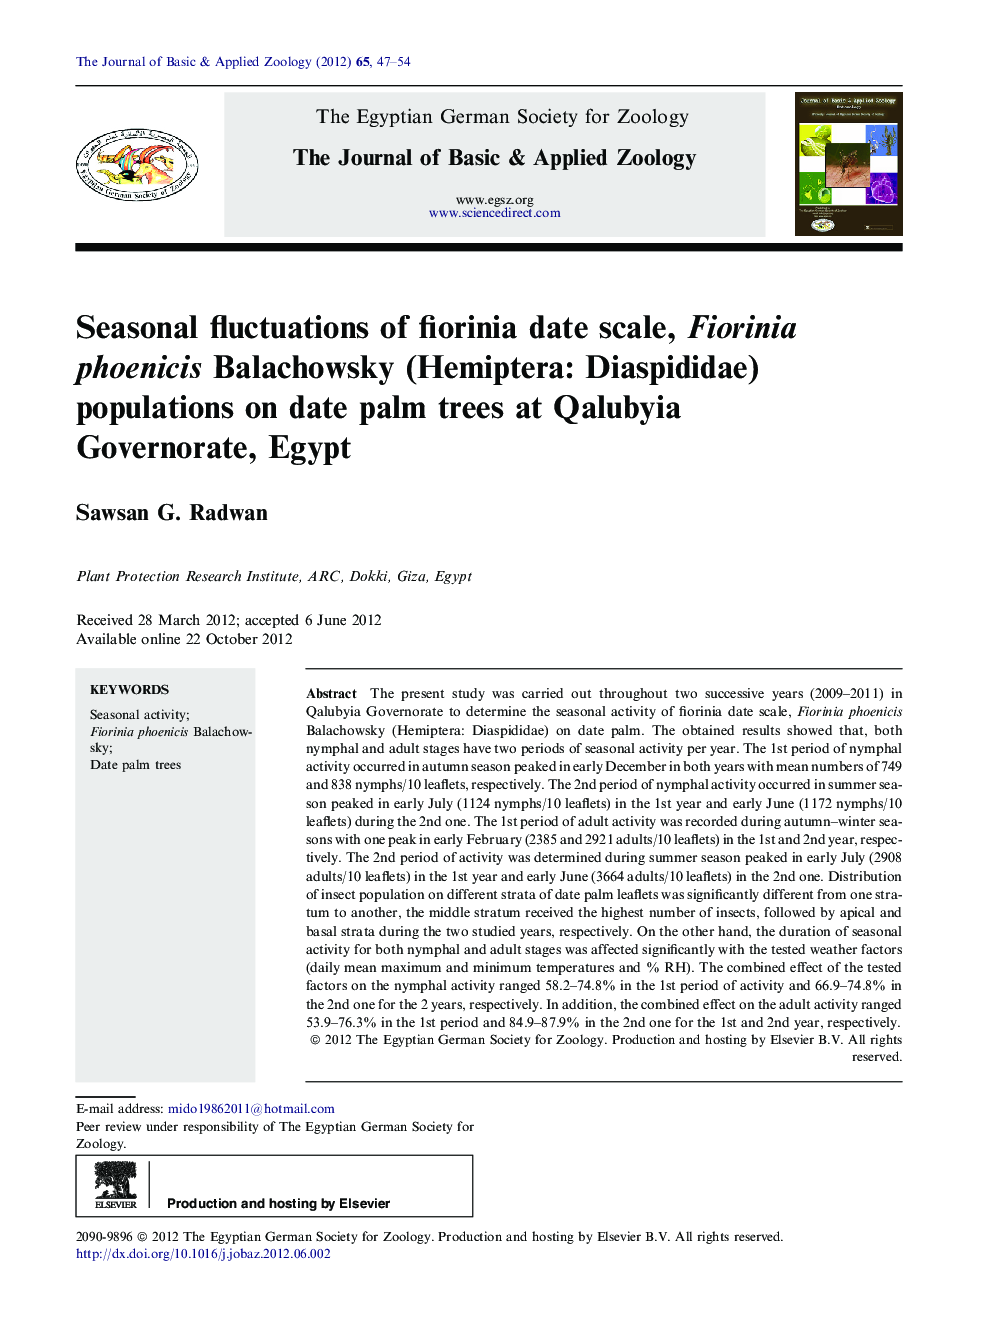 Seasonal fluctuations of fiorinia date scale, Fiorinia phoenicis Balachowsky (Hemiptera: Diaspididae) populations on date palm trees at Qalubyia Governorate, Egypt 